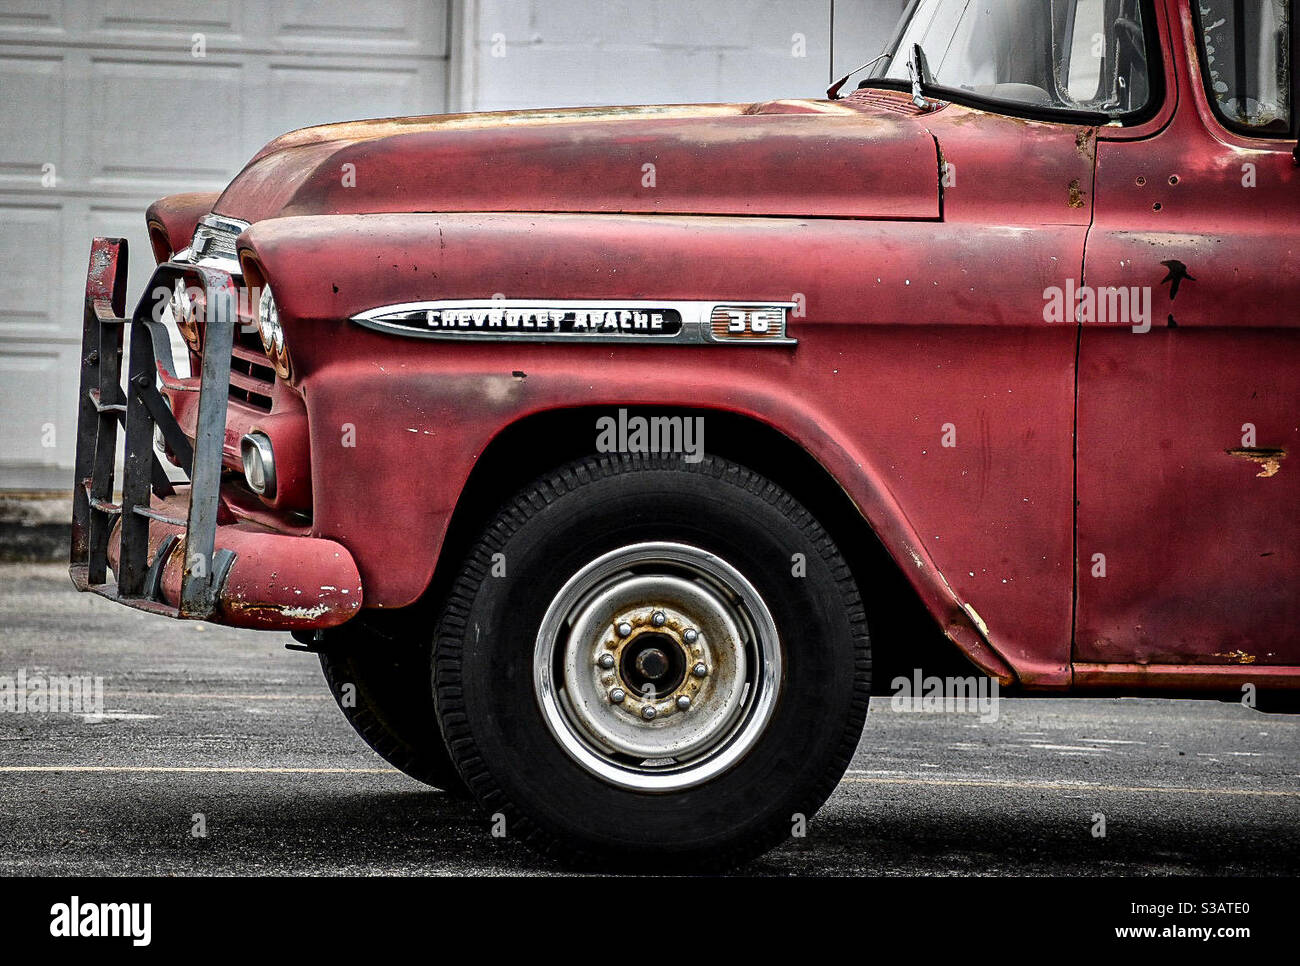 Side profile of the Chevrolet Apache tow truck. Stock Photo